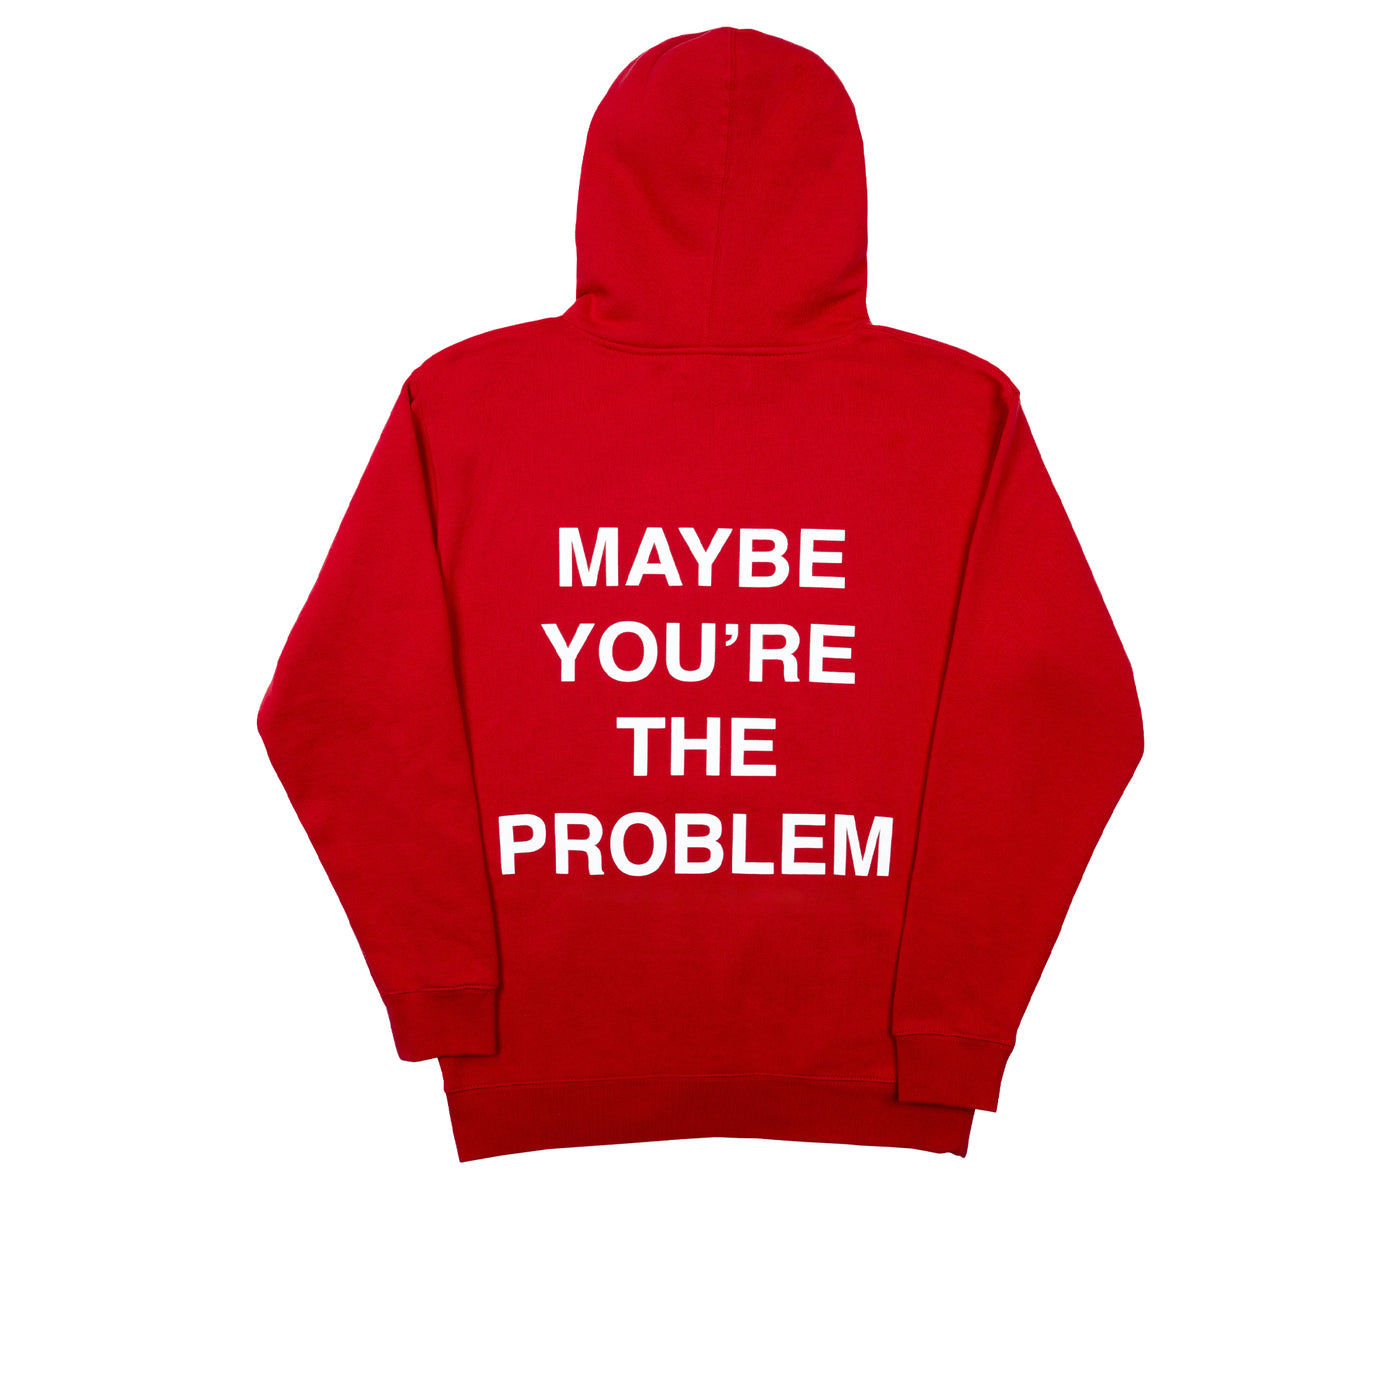 We're Not Really Strangers back side of red hoodie reading "Maybe you're the problem" in all caps white lettering.